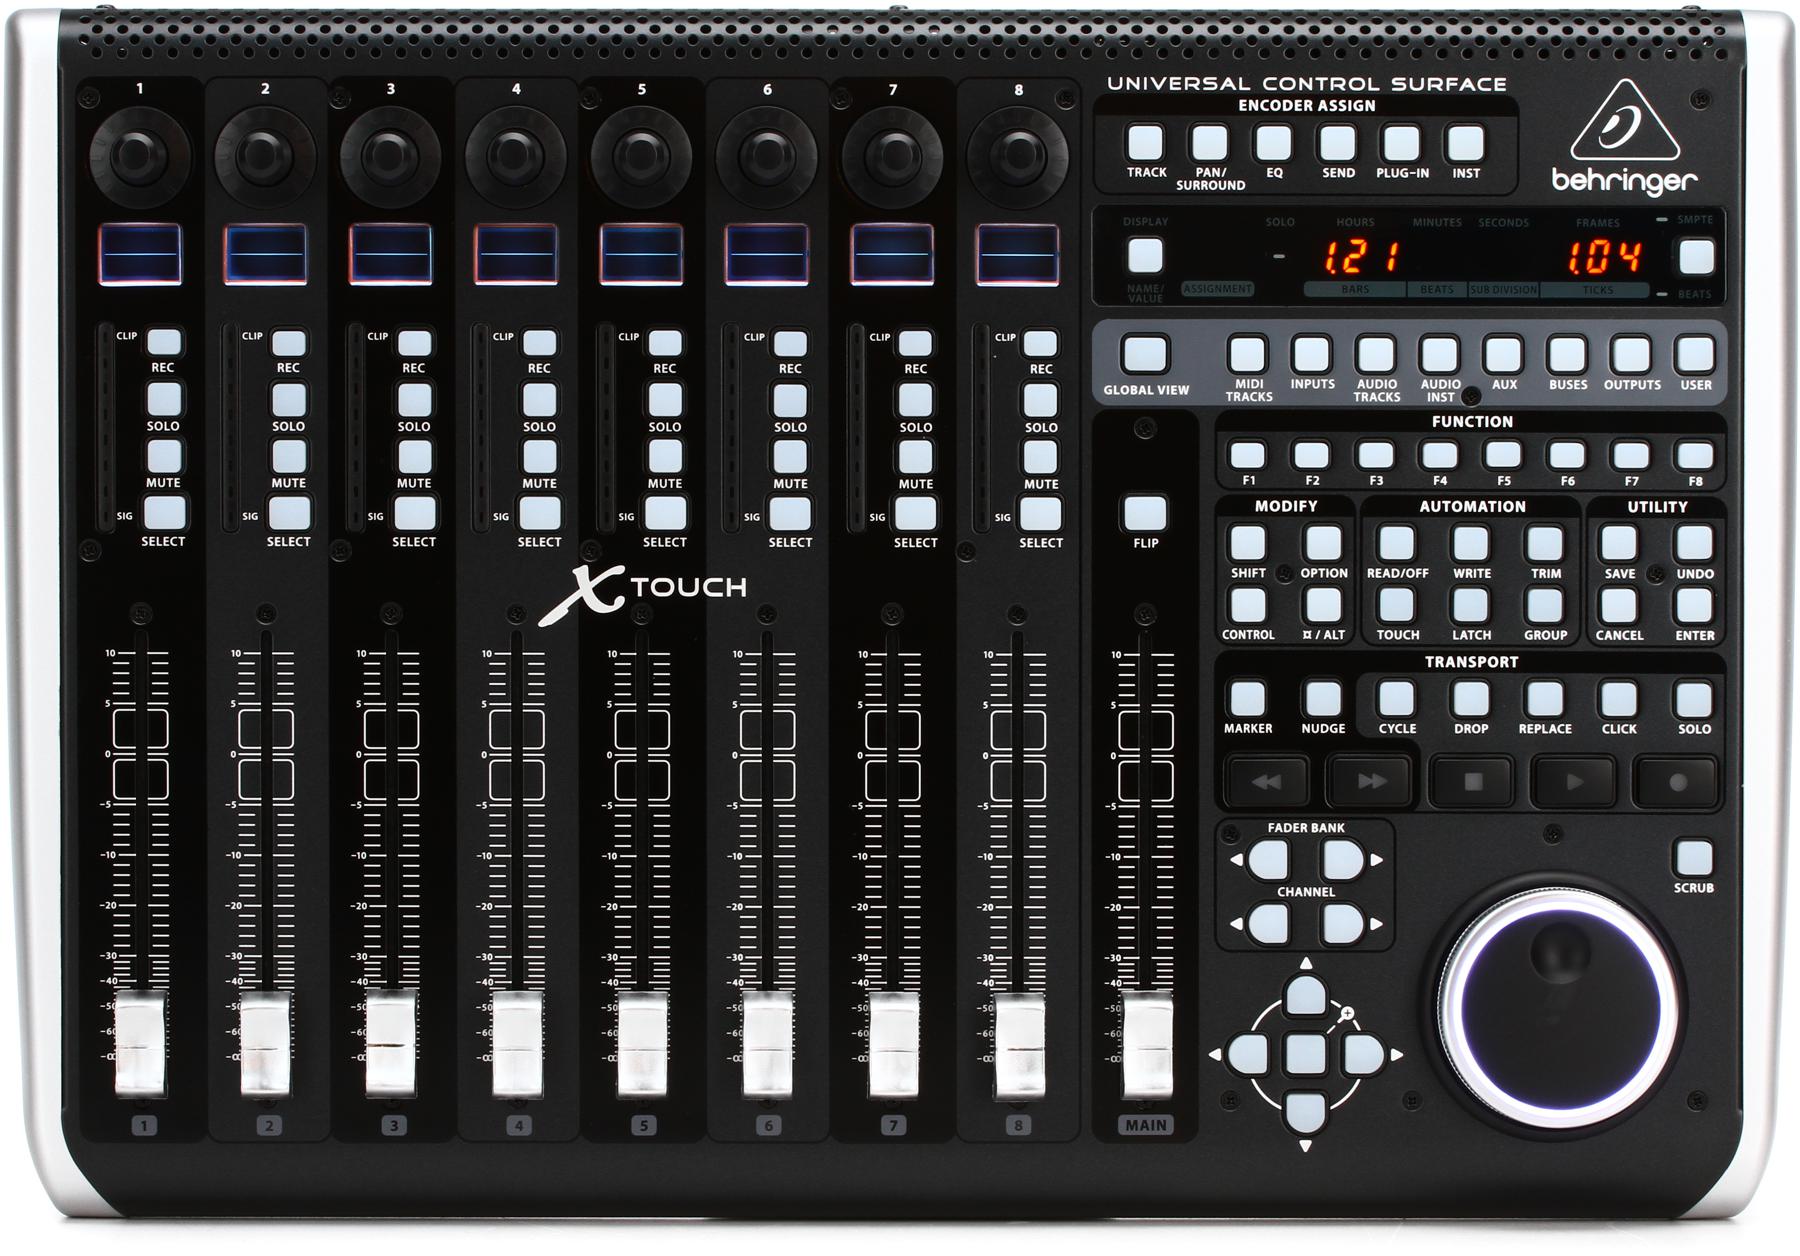 4. BEHRINGER (XTOUCH)